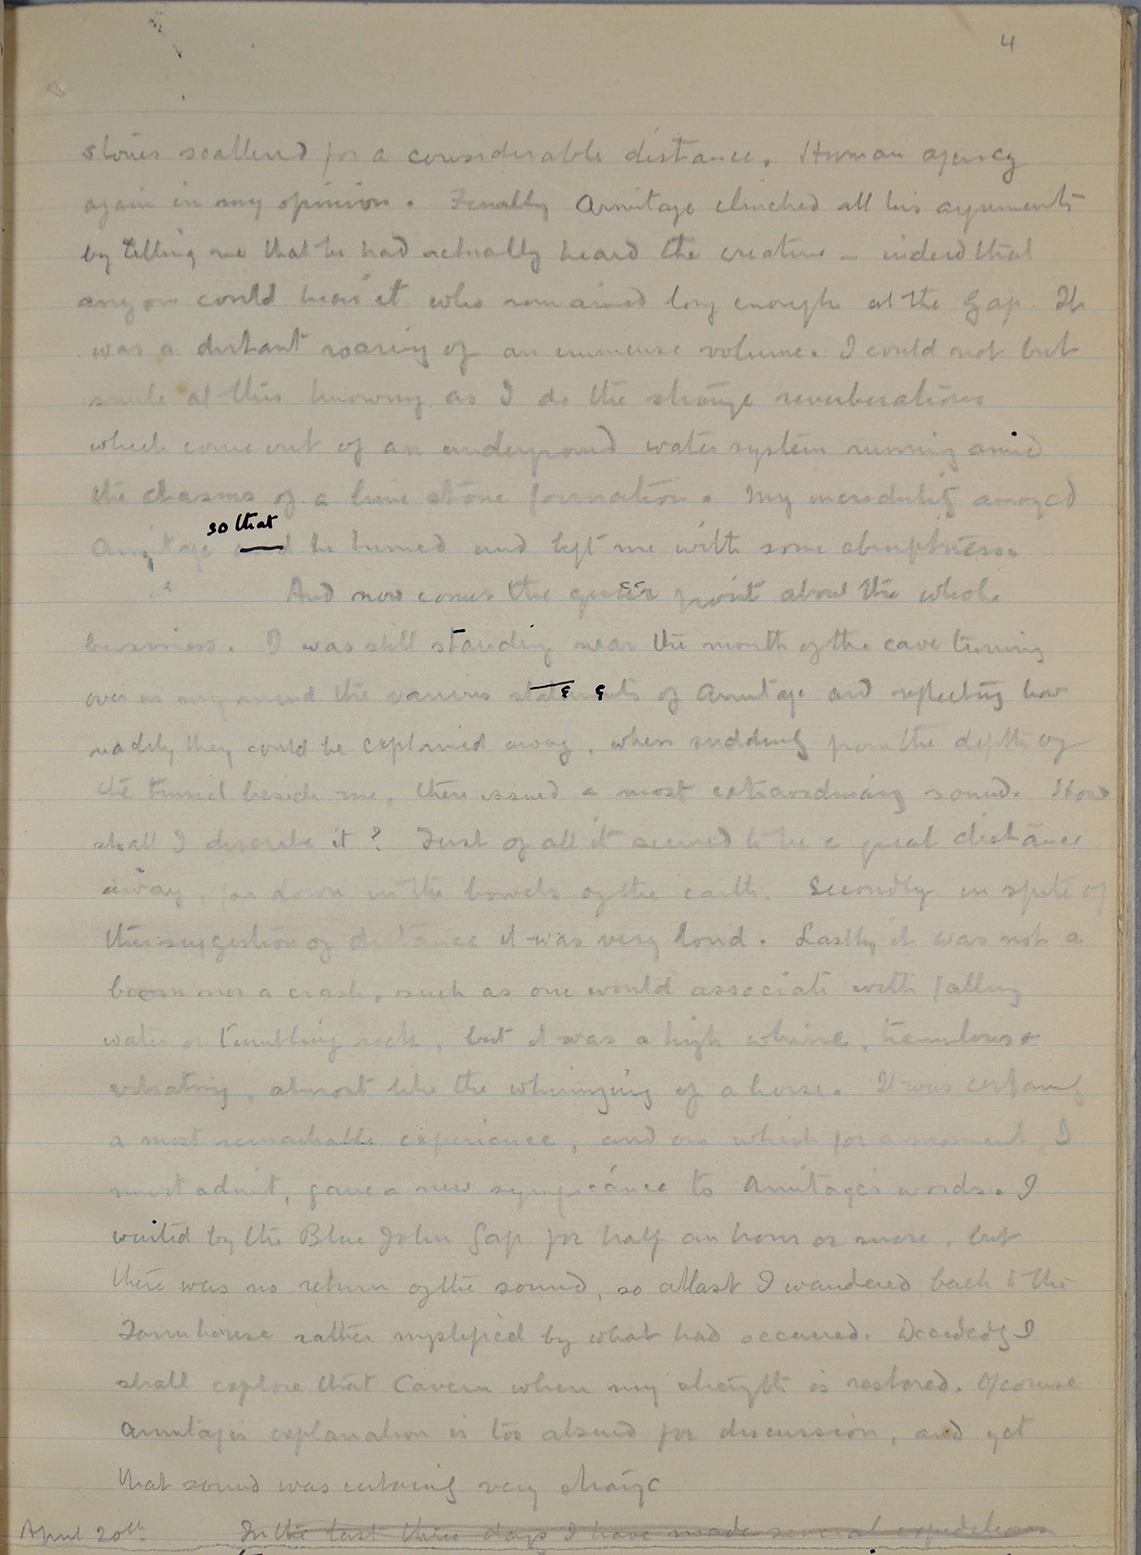 page 4 of the manuscript of "The Terror of Blue John Gap"